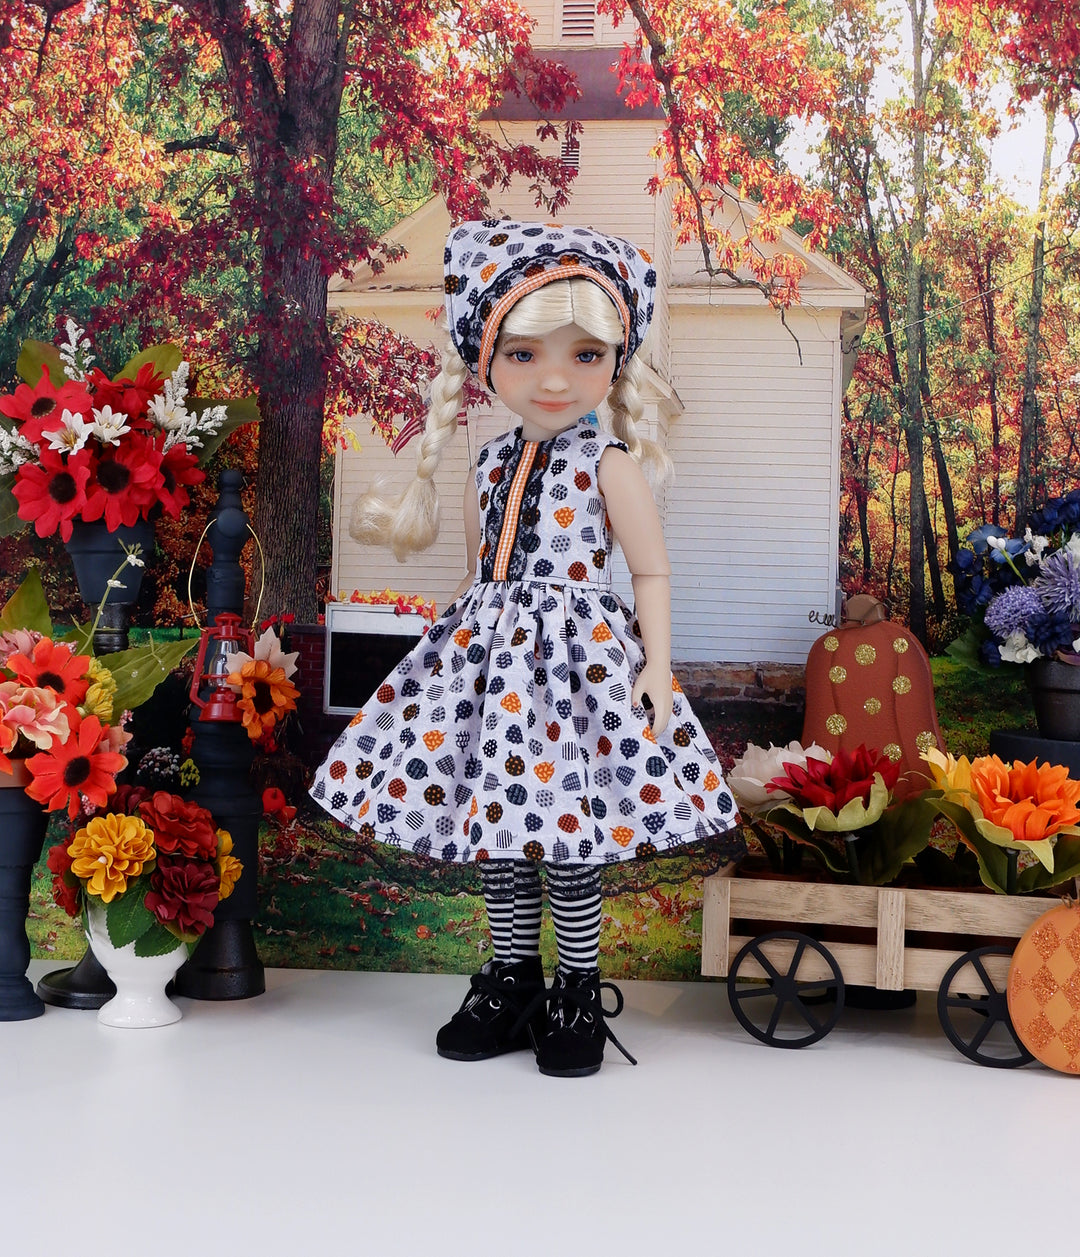 Farmhouse Pumpkins - dress with boots for Ruby Red Fashion Friends doll